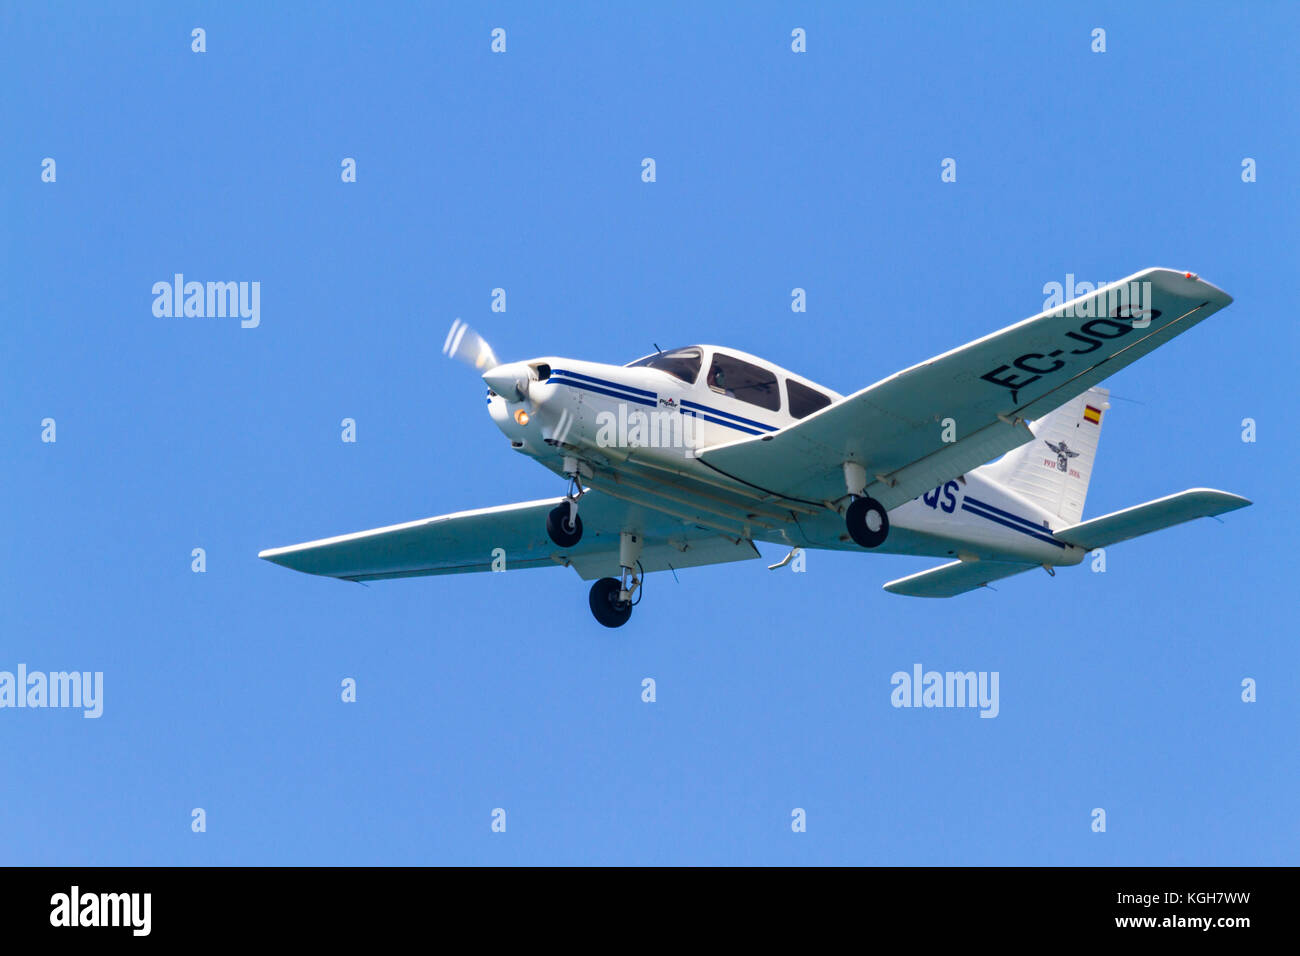 MOTRIL, GRANADA, SPAIN-JUN 11: Aircraft Piper PA-28-161 Warrior III taking part in a exhibition on the 12th international  airshow of Motril on June 1 Stock Photo